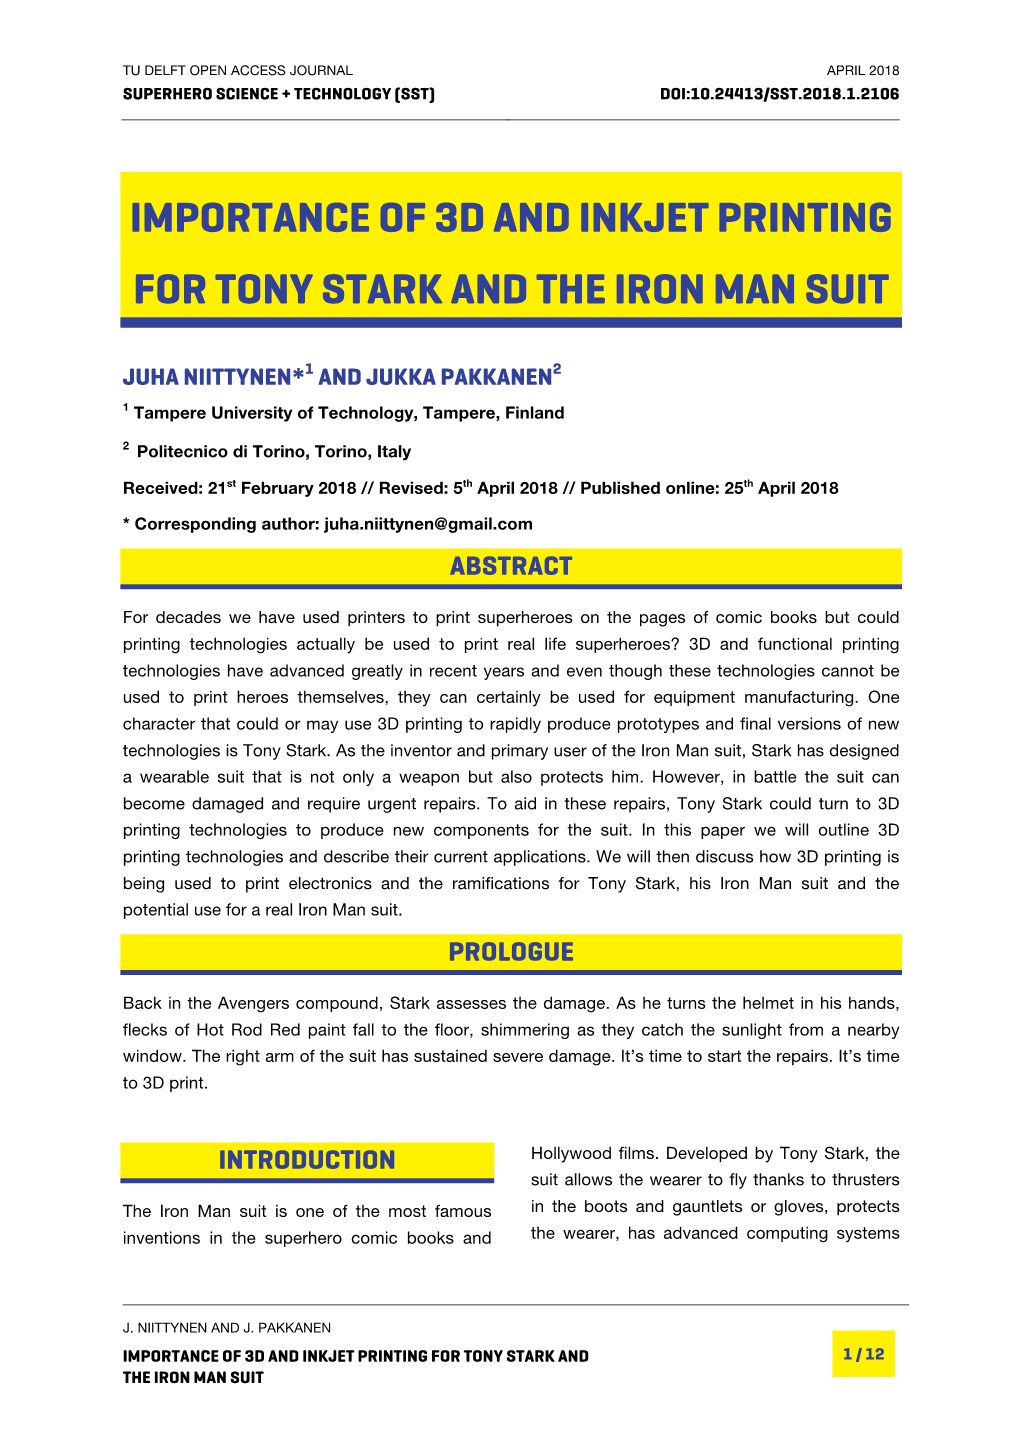 Importance of 3D and Inkjet Printing for Tony Stark and the Iron Man Suit